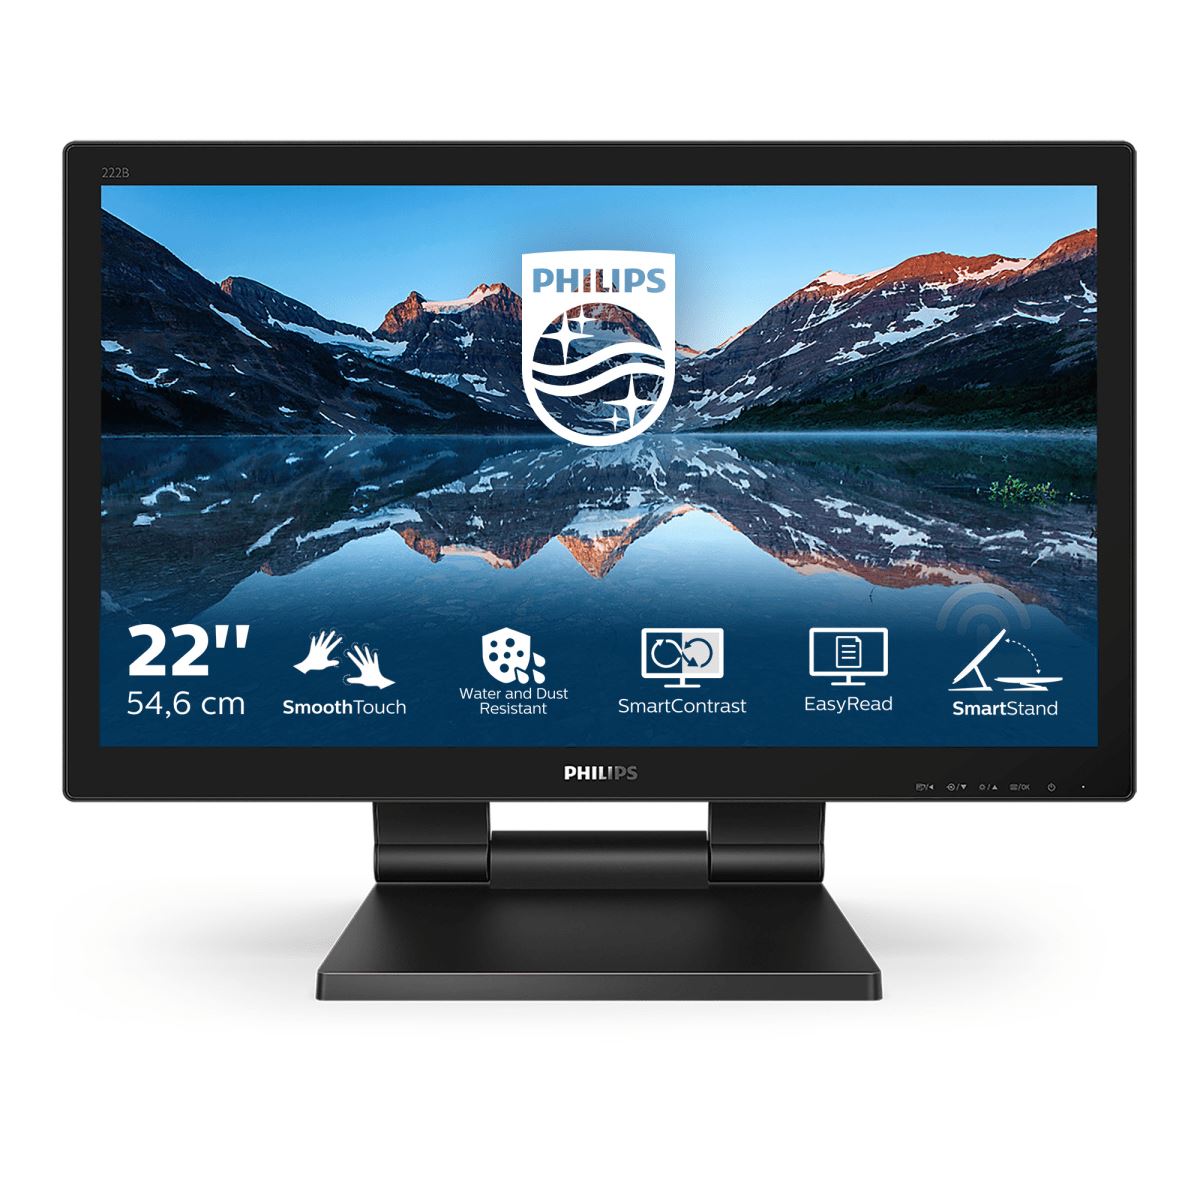 Philips LCD Monitor with SmoothTouch 222B9T/00